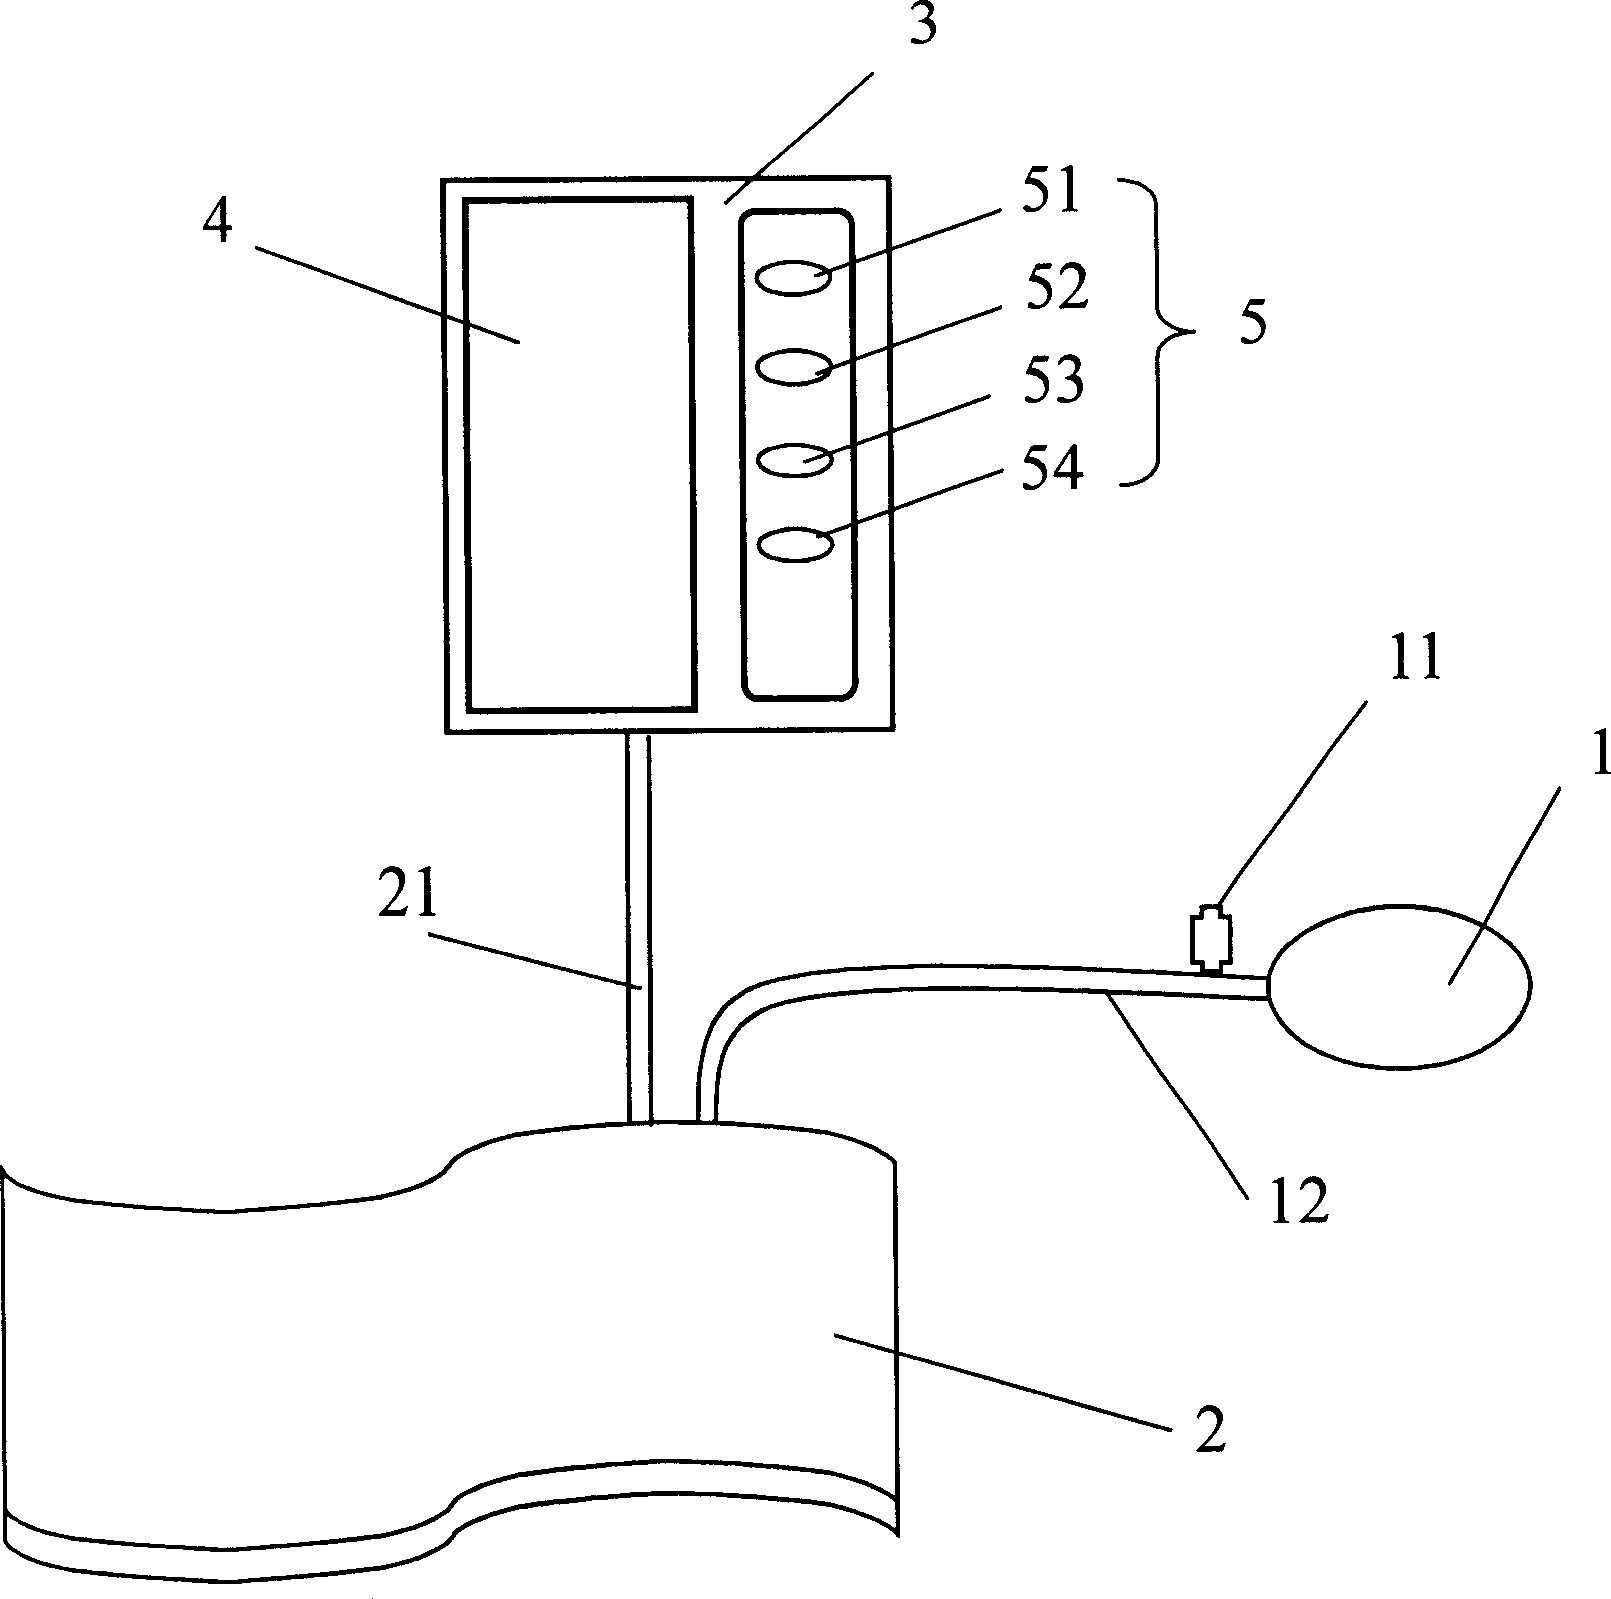 Electronic blood manometer and its display method